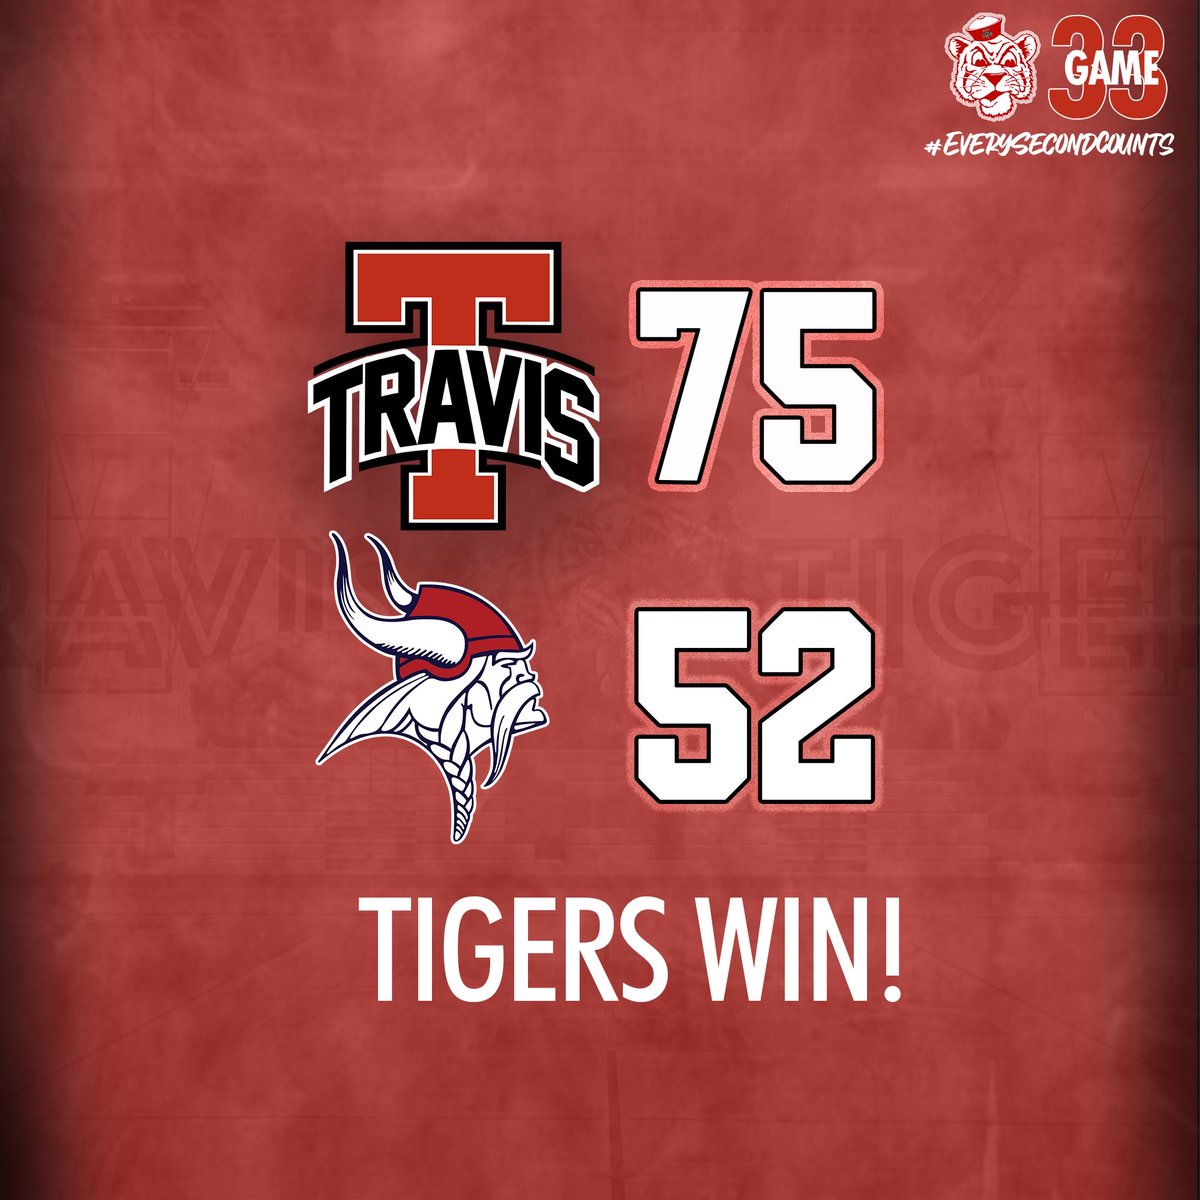 Tigers close regular season with sweep of Dulles! Varsity improves to 27-6 and advances to play Paetow in the Big-District playoffs next week. All teams combined the program has a record of 110-28 on season 😳 @hoopinsider⁩ ⁦@RcsSports⁩ ⁦@THS_Tigers⁩ #TheTravisWay